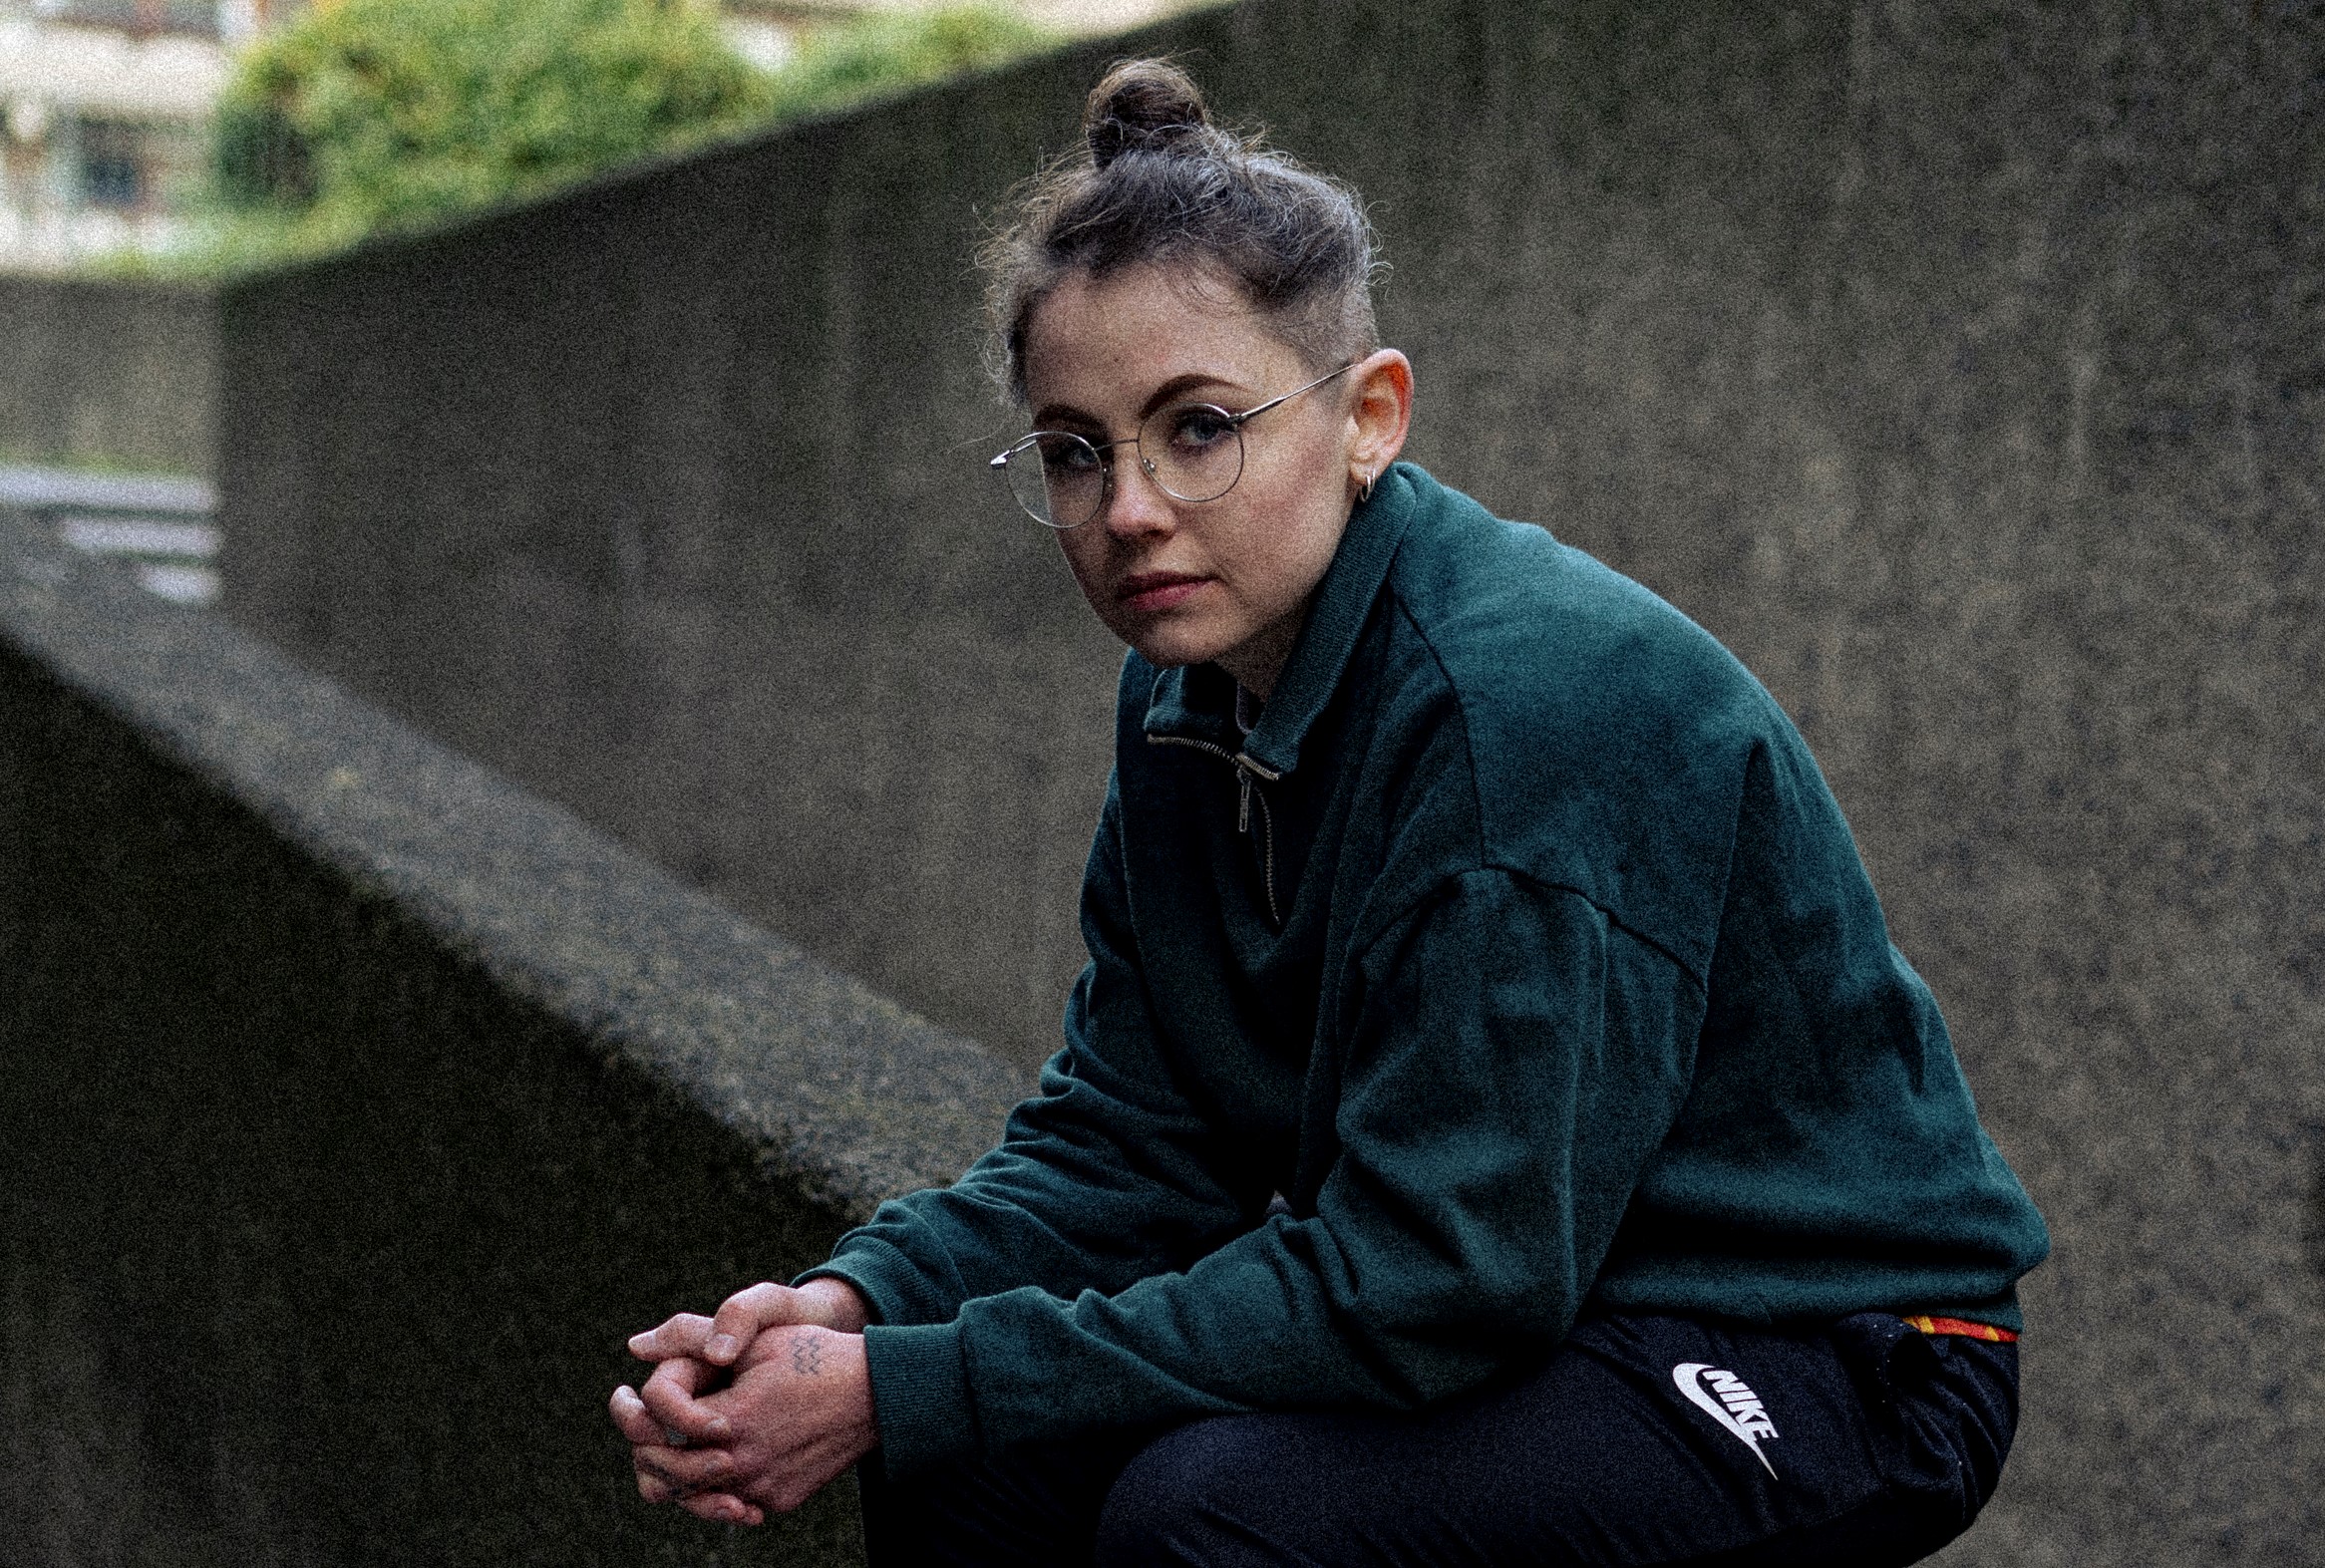 Welsh Soul Artist Nia Wyn Shares New Single ‘What Did You Expect’